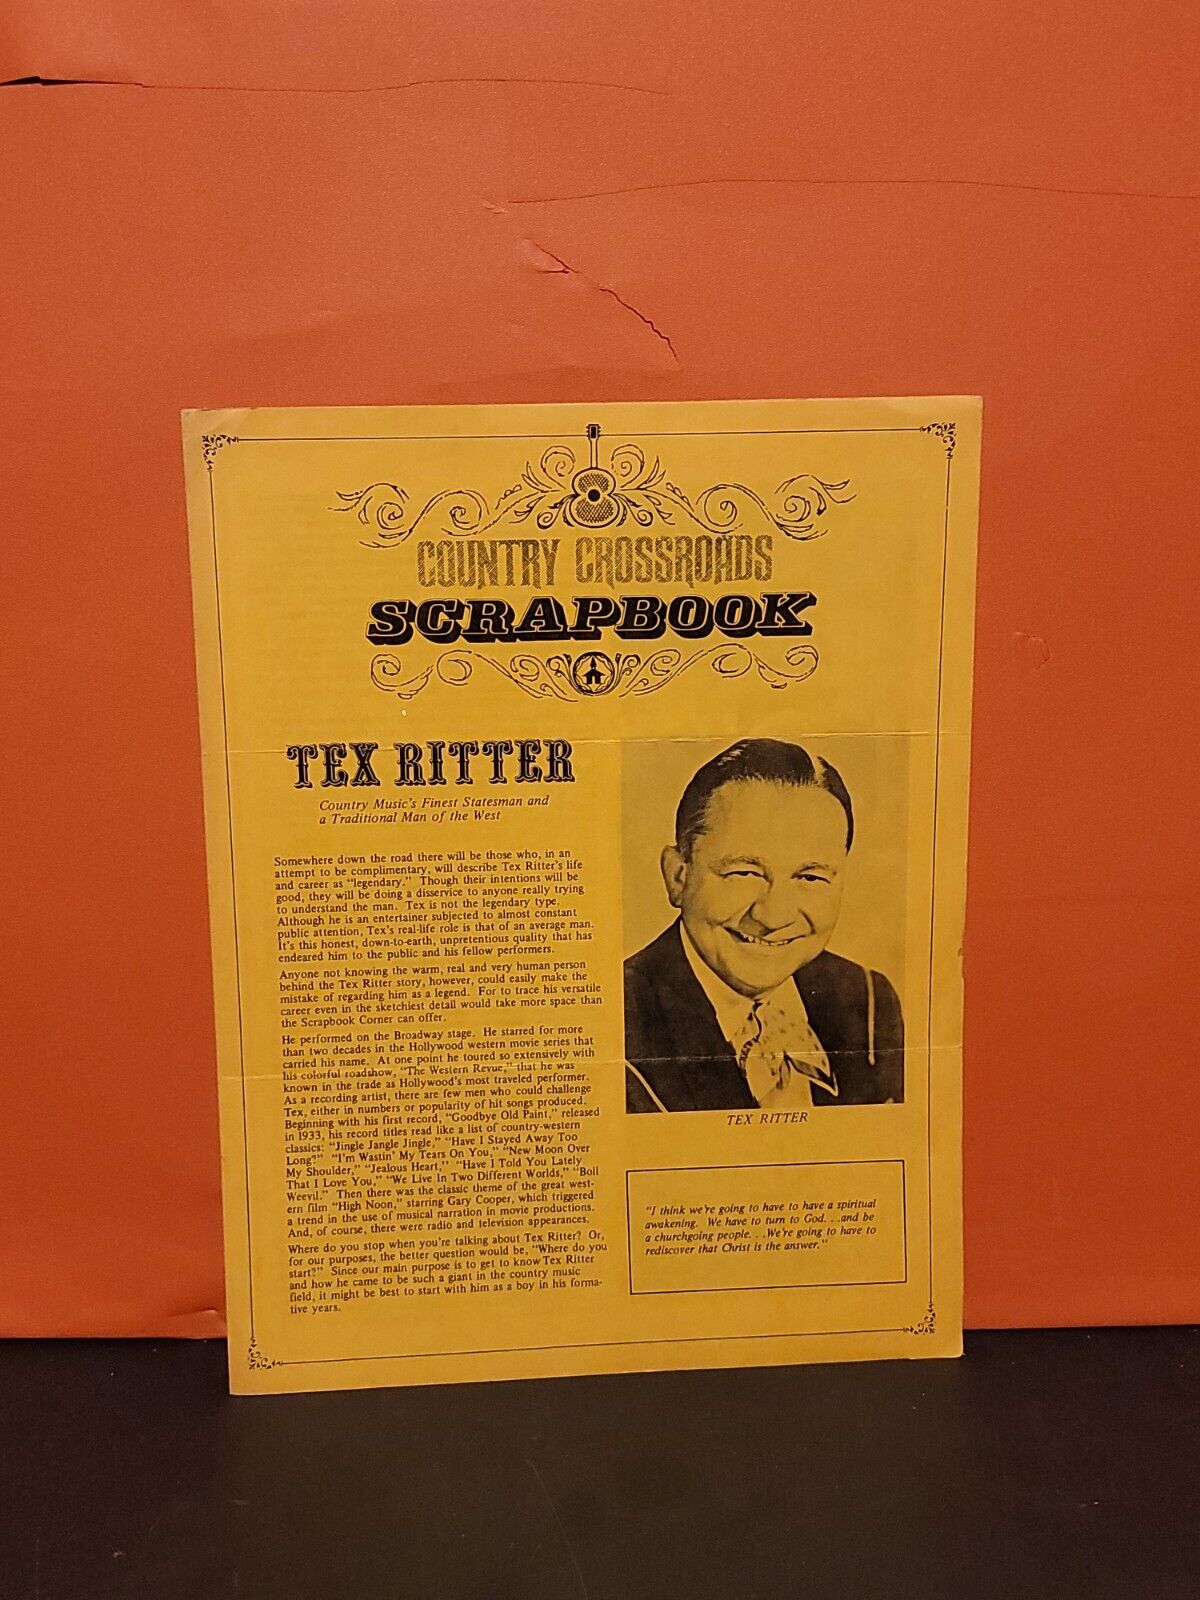 Vintage Country Crossroads Scrapbook featuring Music Star Tex Ritter